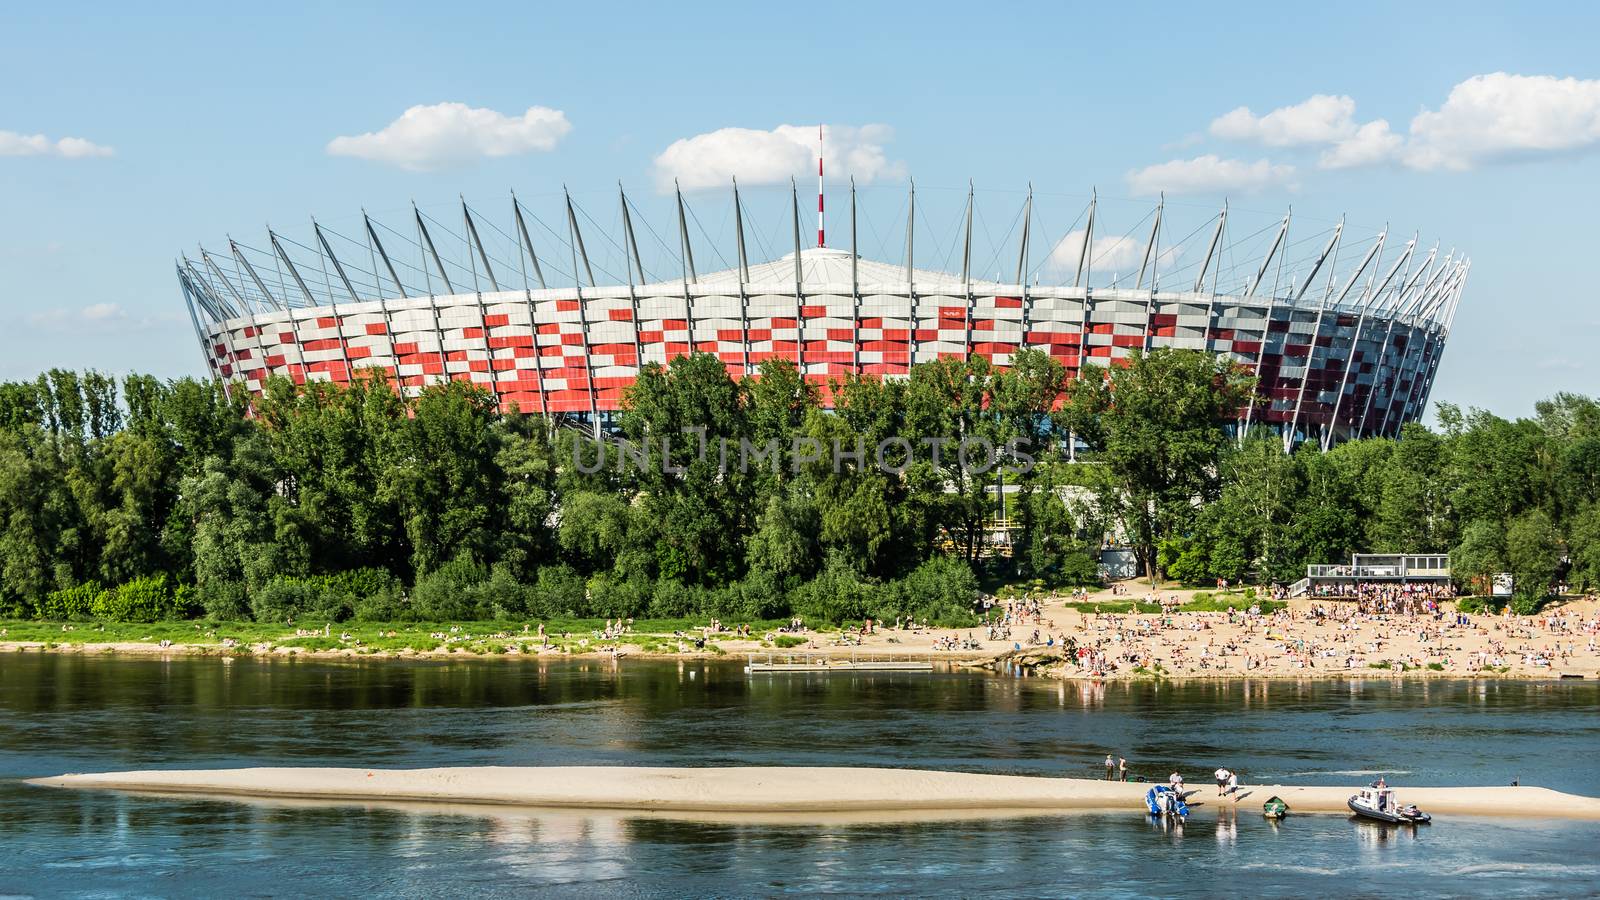 National Stadium in Warsaw, designed for UEFA EURO 2012, with its  retractable roof and advanced infrastructure remains one of the most modern sport facility in Europe.